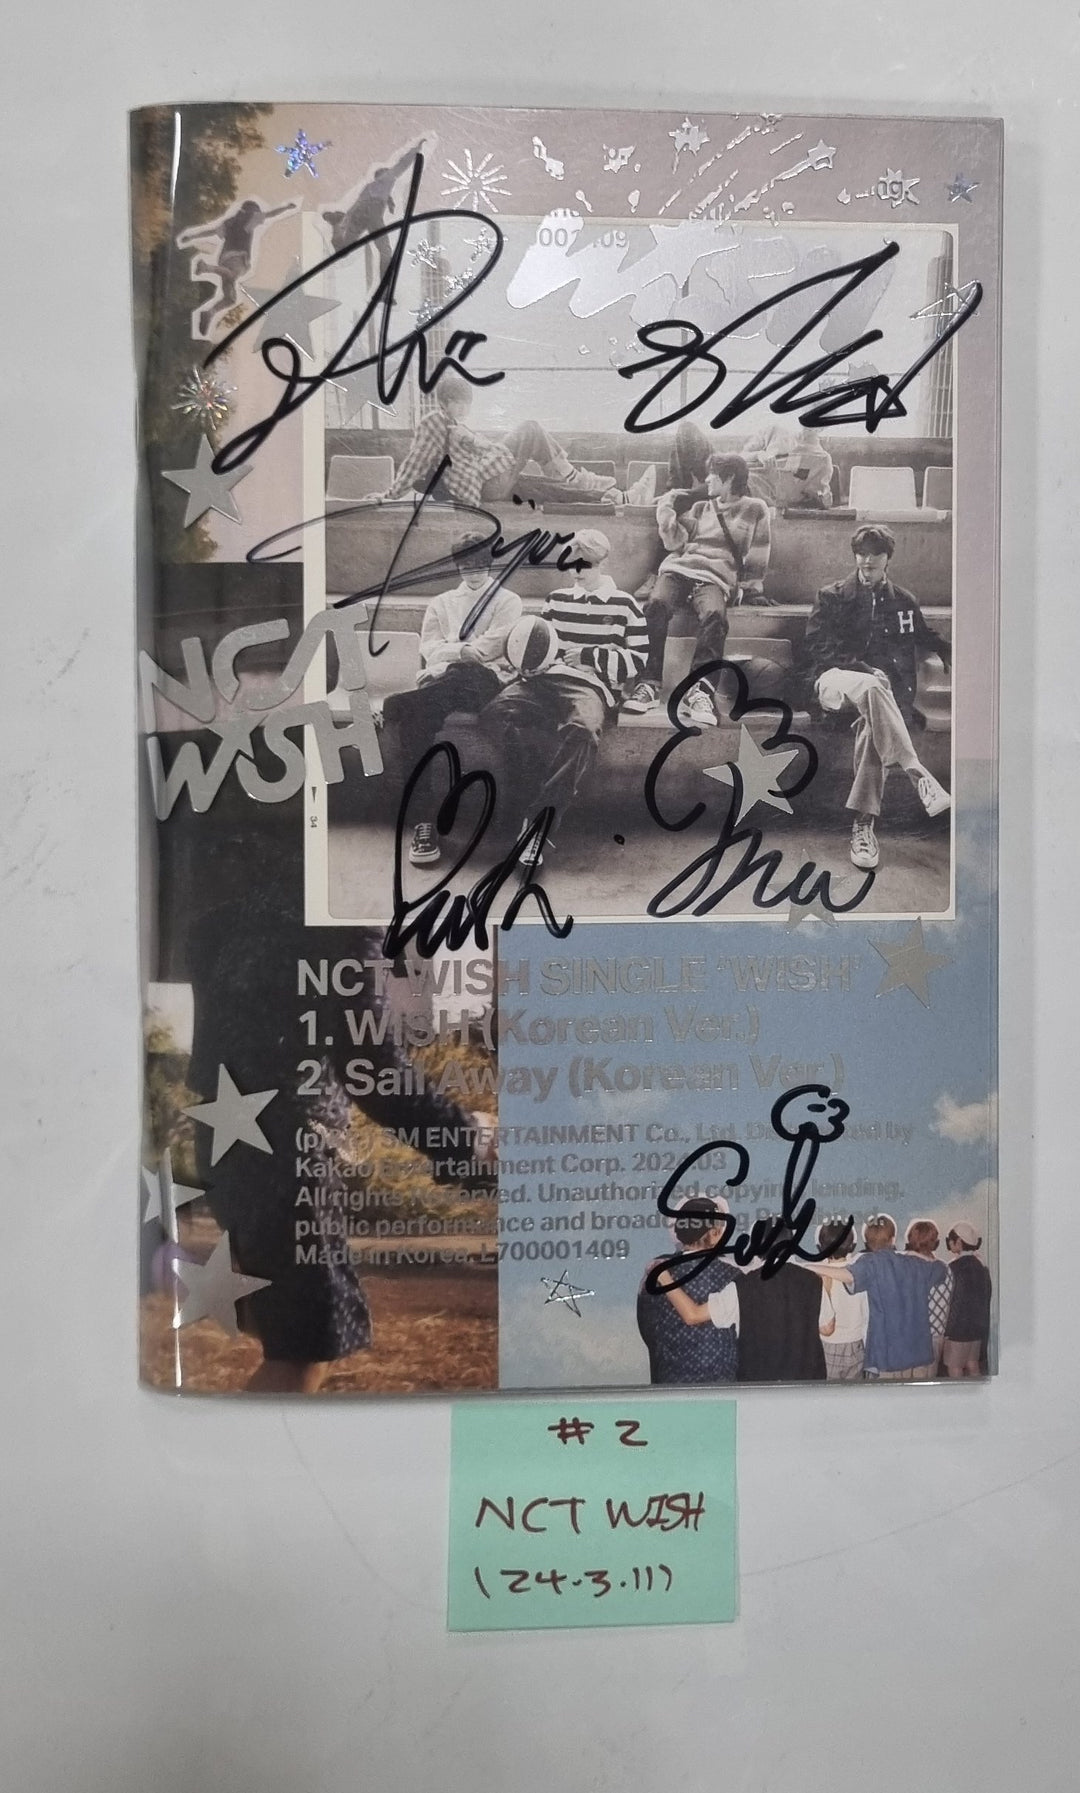 NCT Wish - Hand Autographed(Signed) Promo Album [24.3.11]